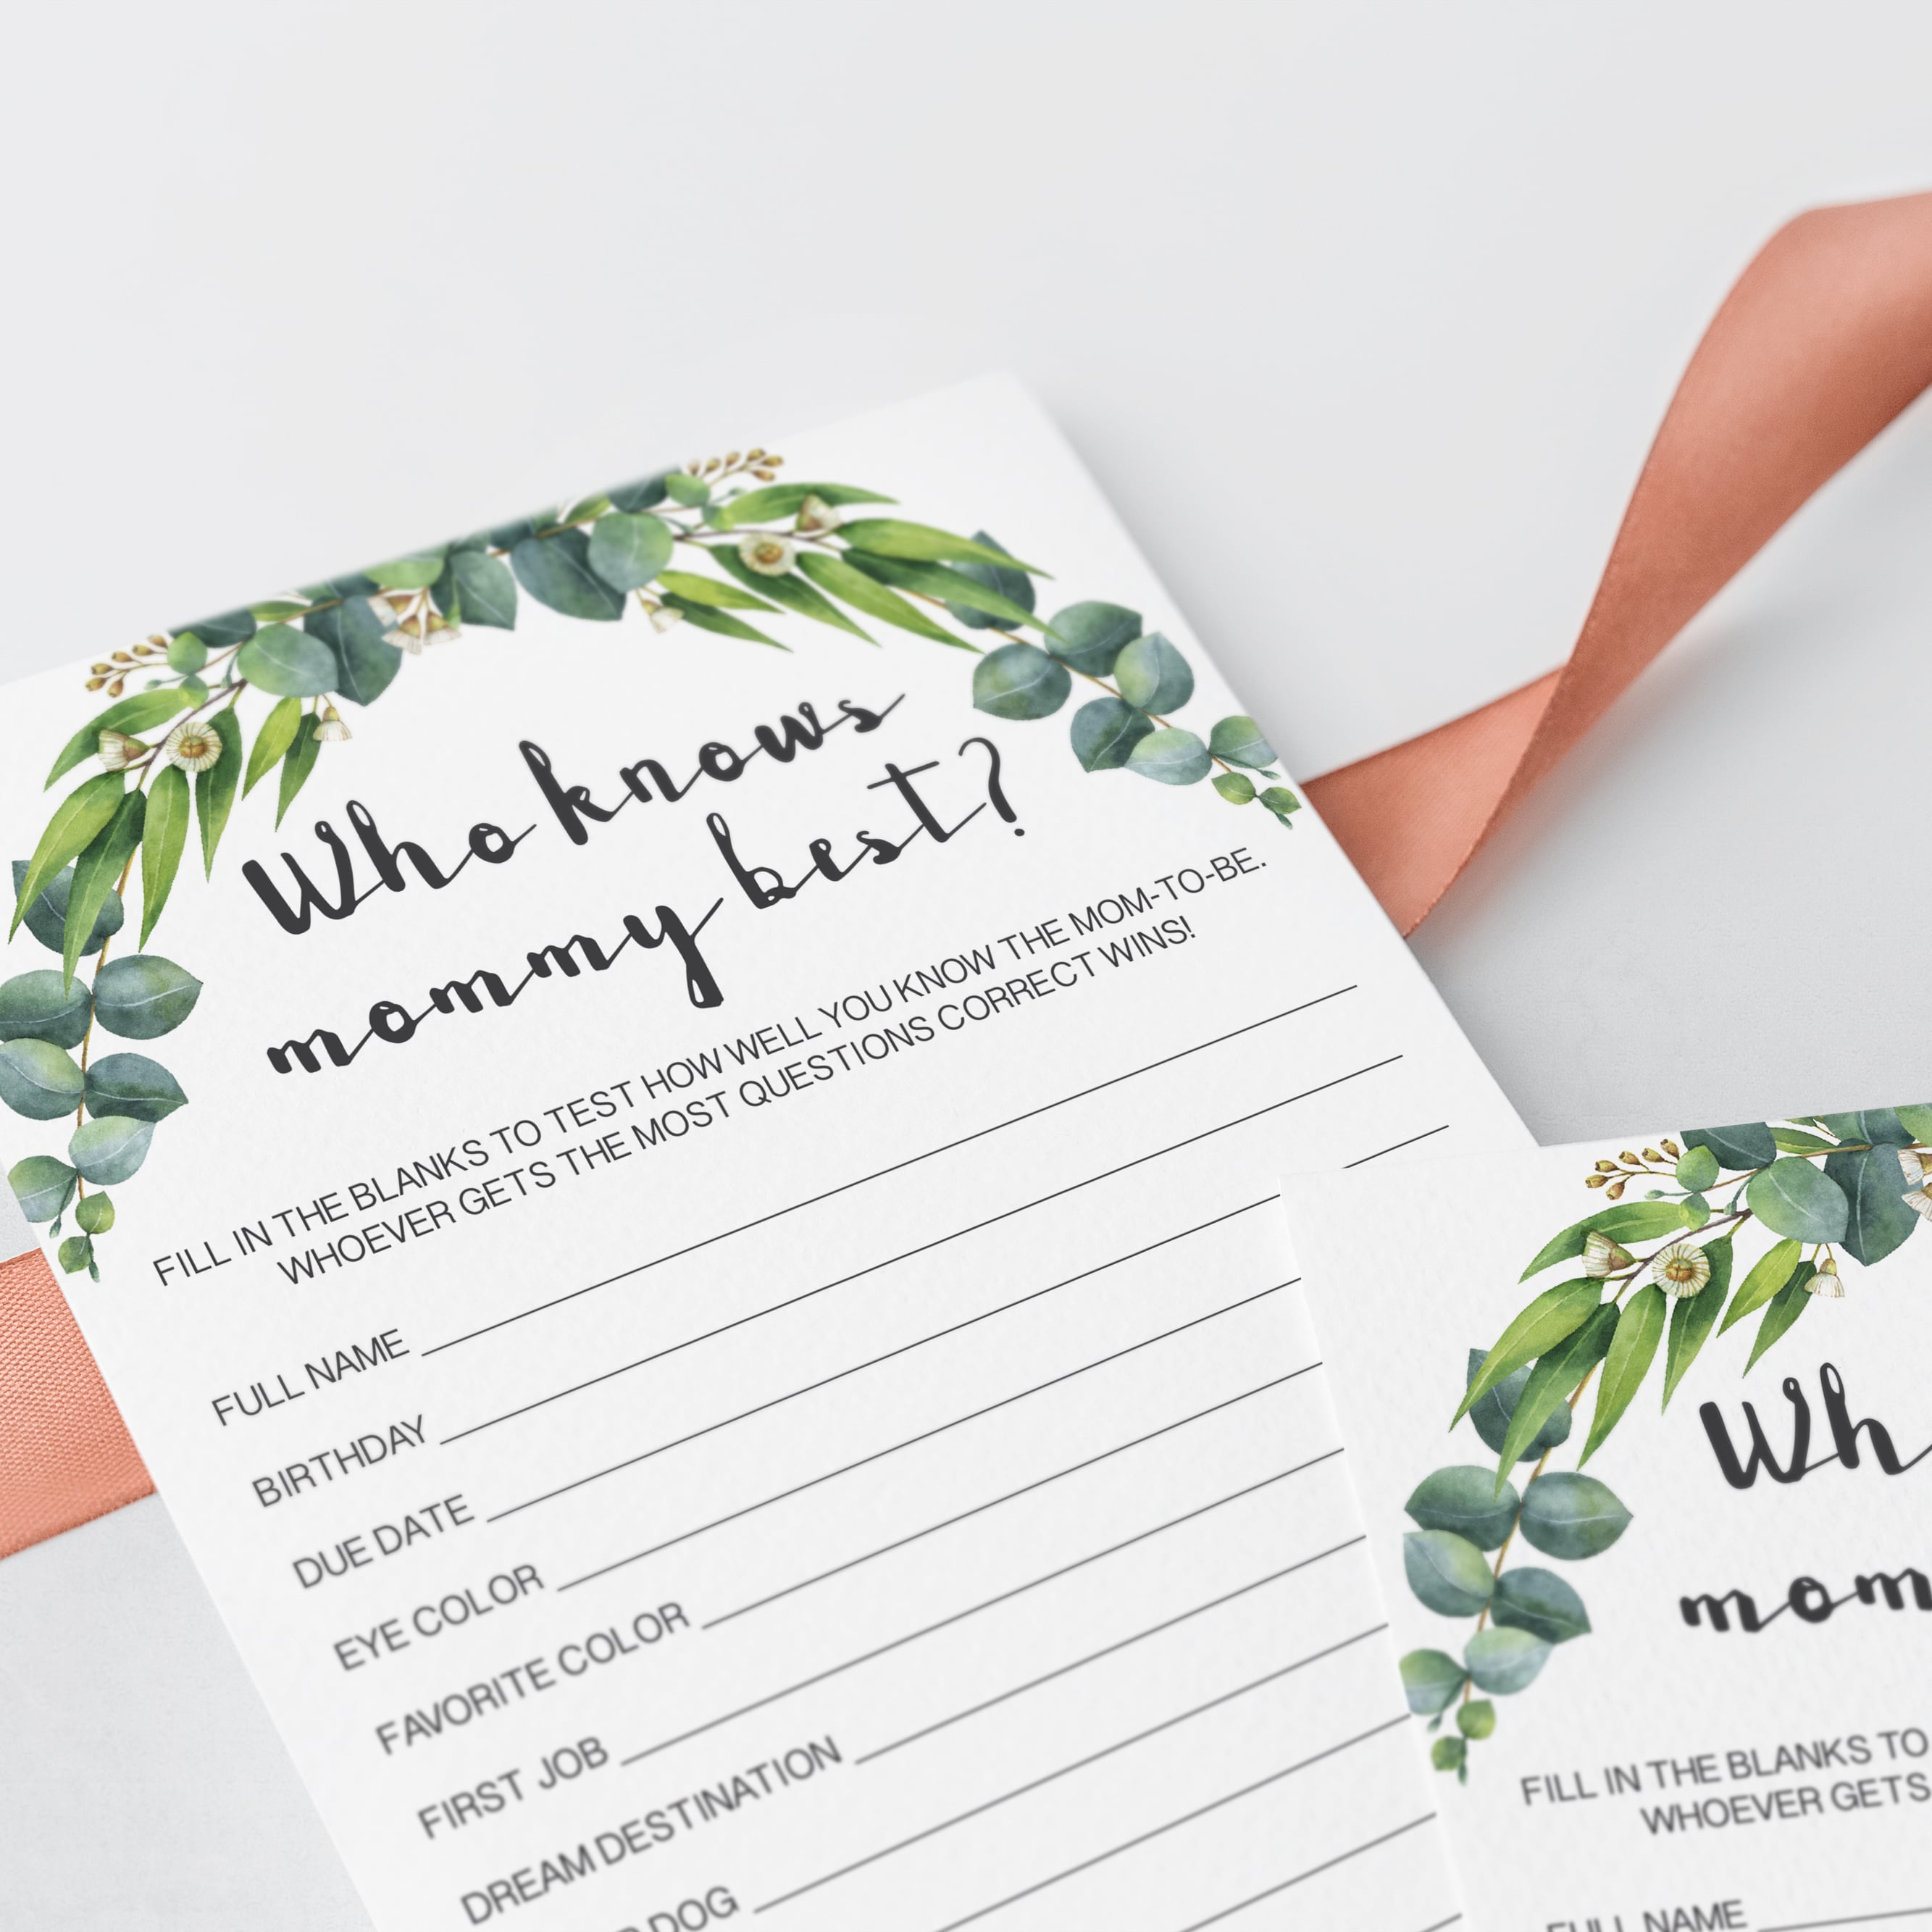 Who knows mommy best baby shower game with eucalyptus leaves by LittleSizzle